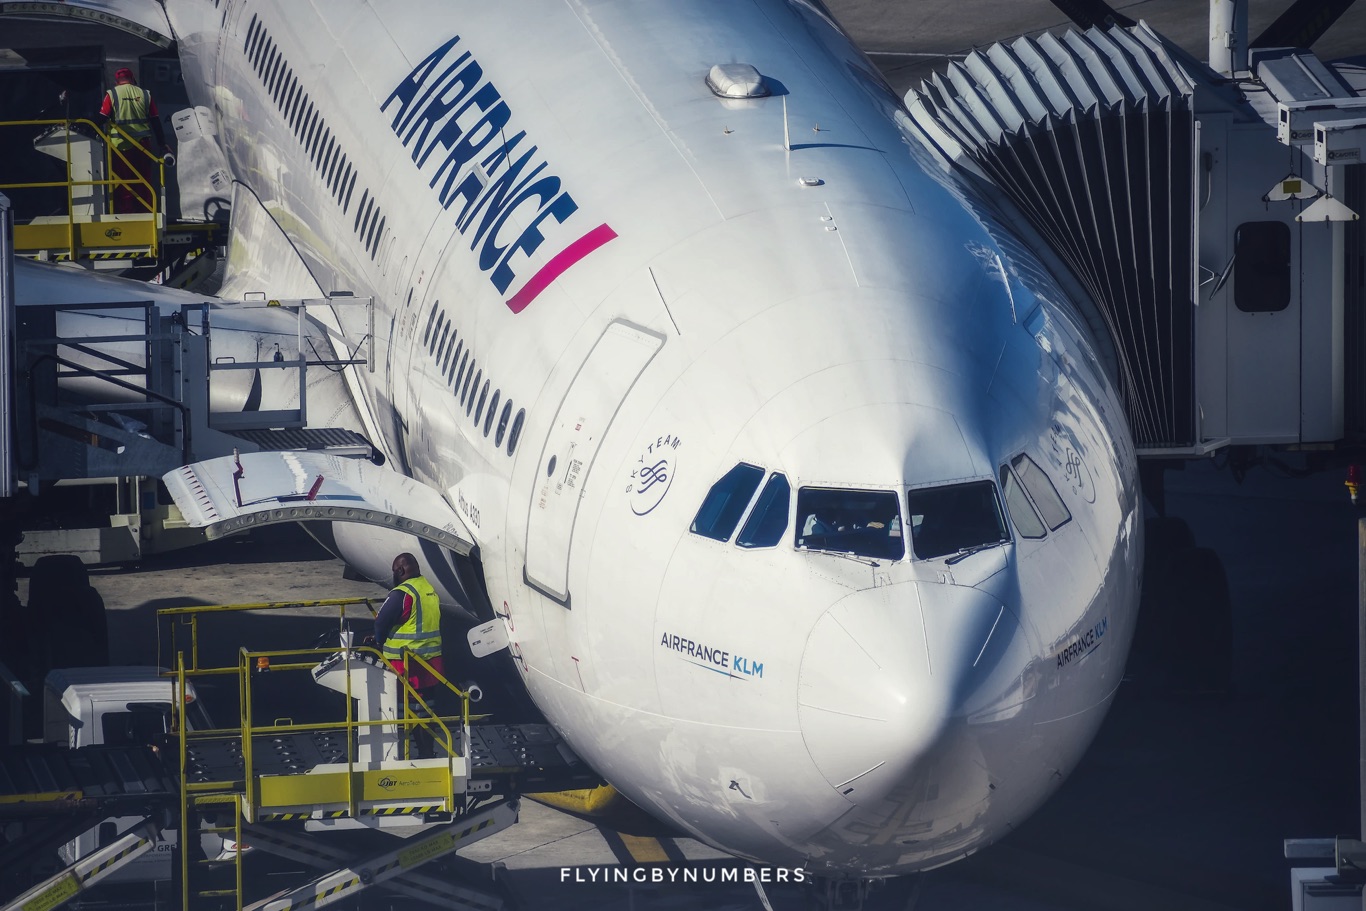 Air France offer their staff permanent contracts